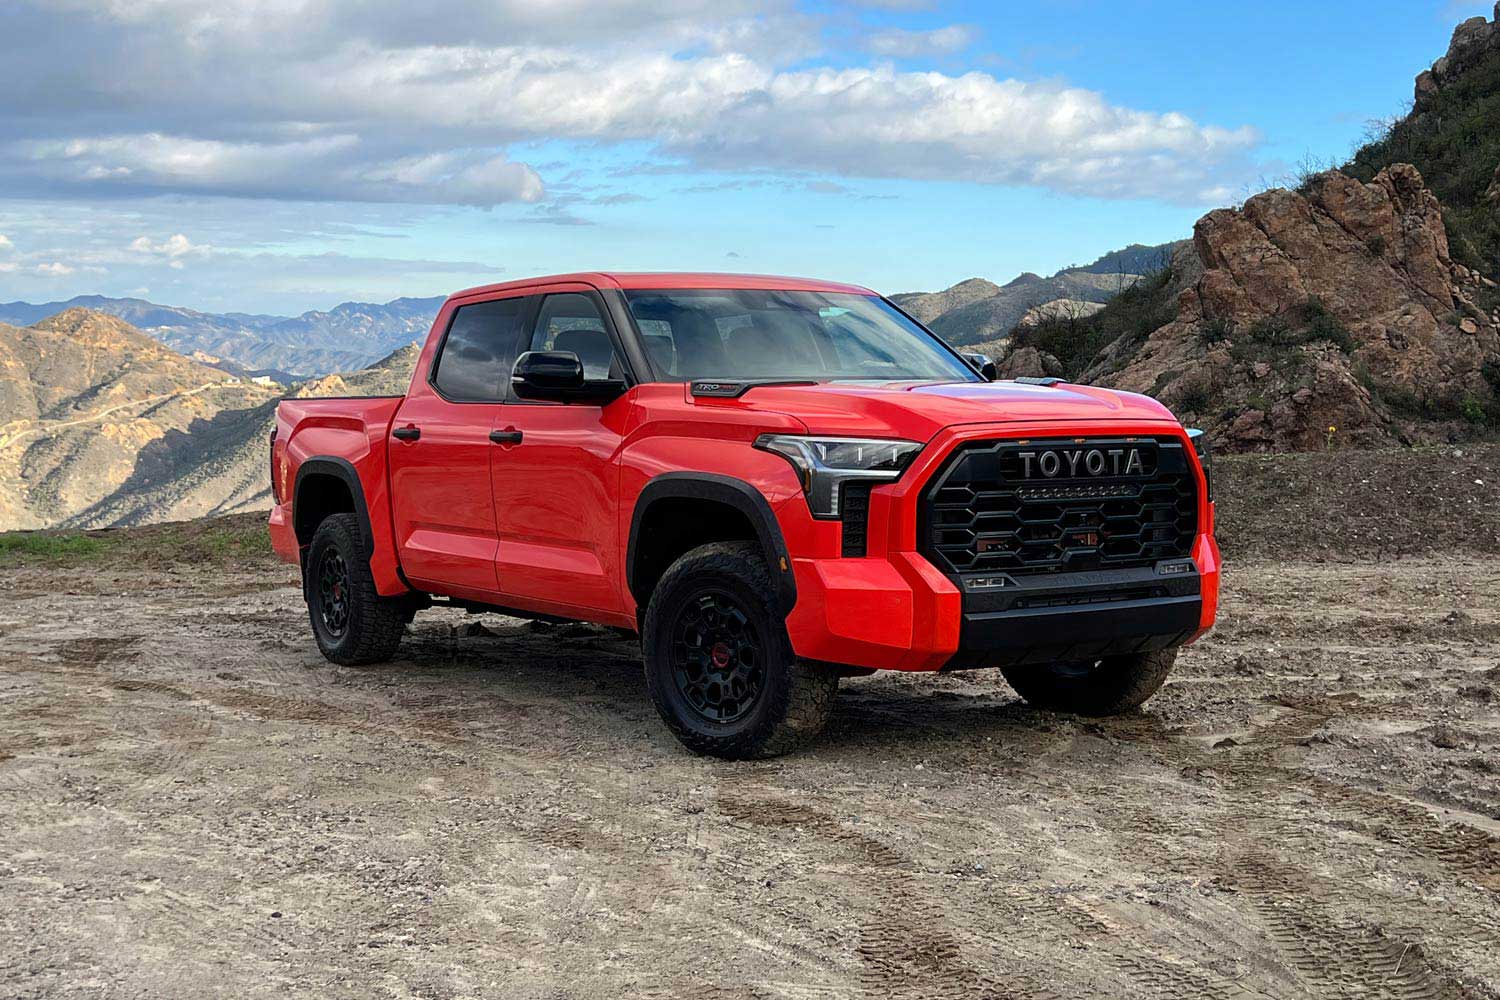 2022 Toyota Tundra Reviews, Price, MPG and More | Capital One Auto Navigator